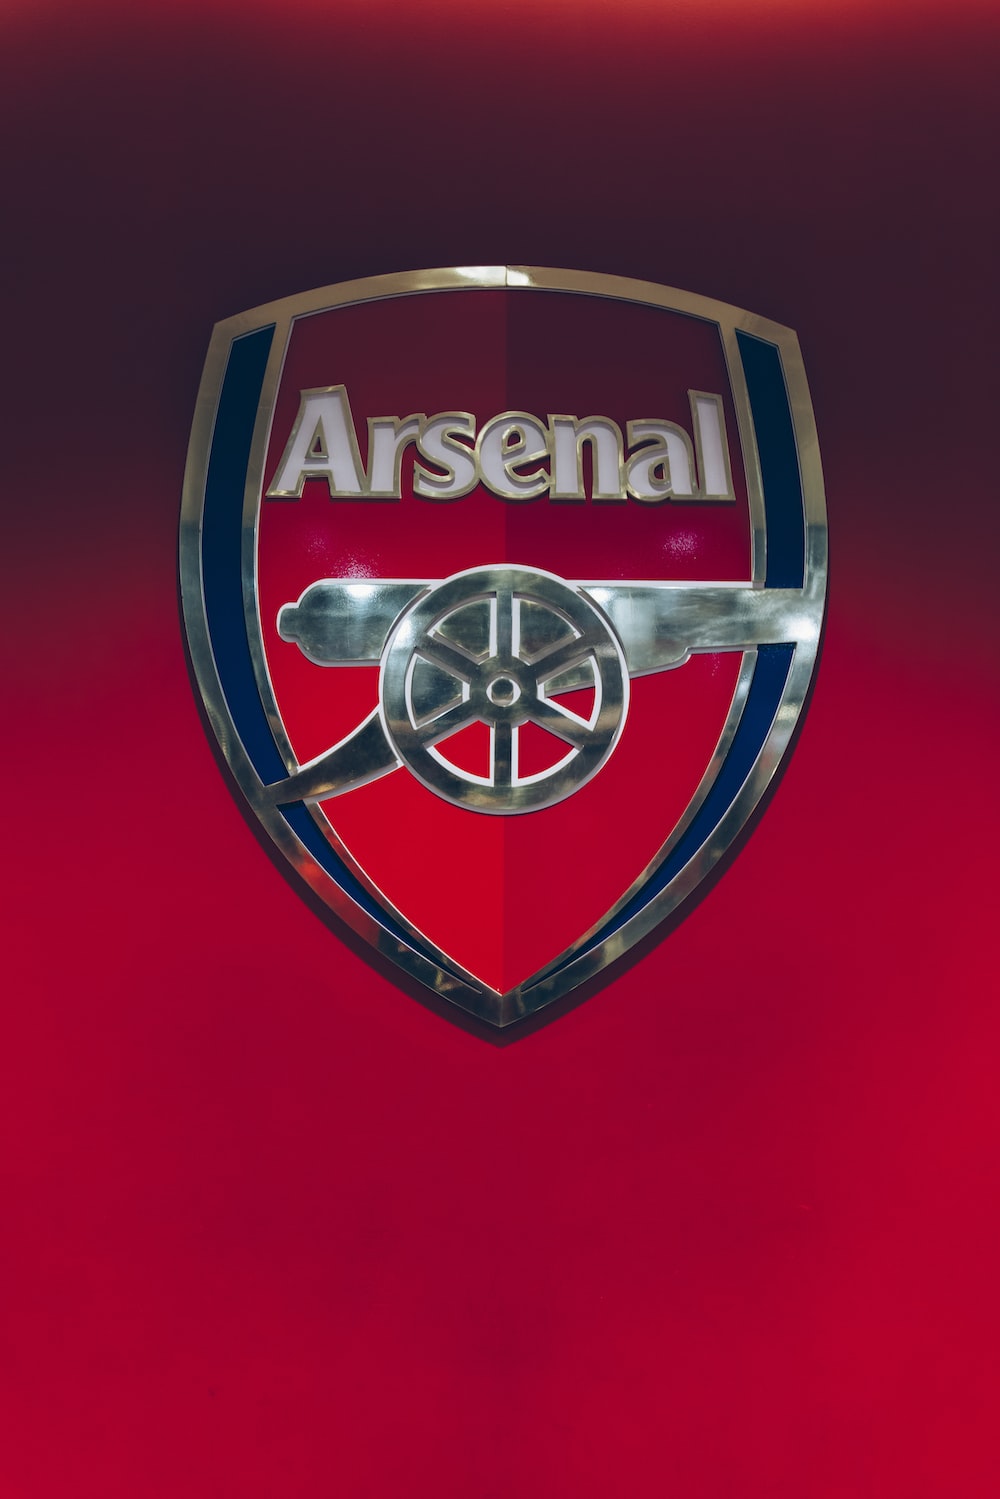 Arsenal pictures download free images on